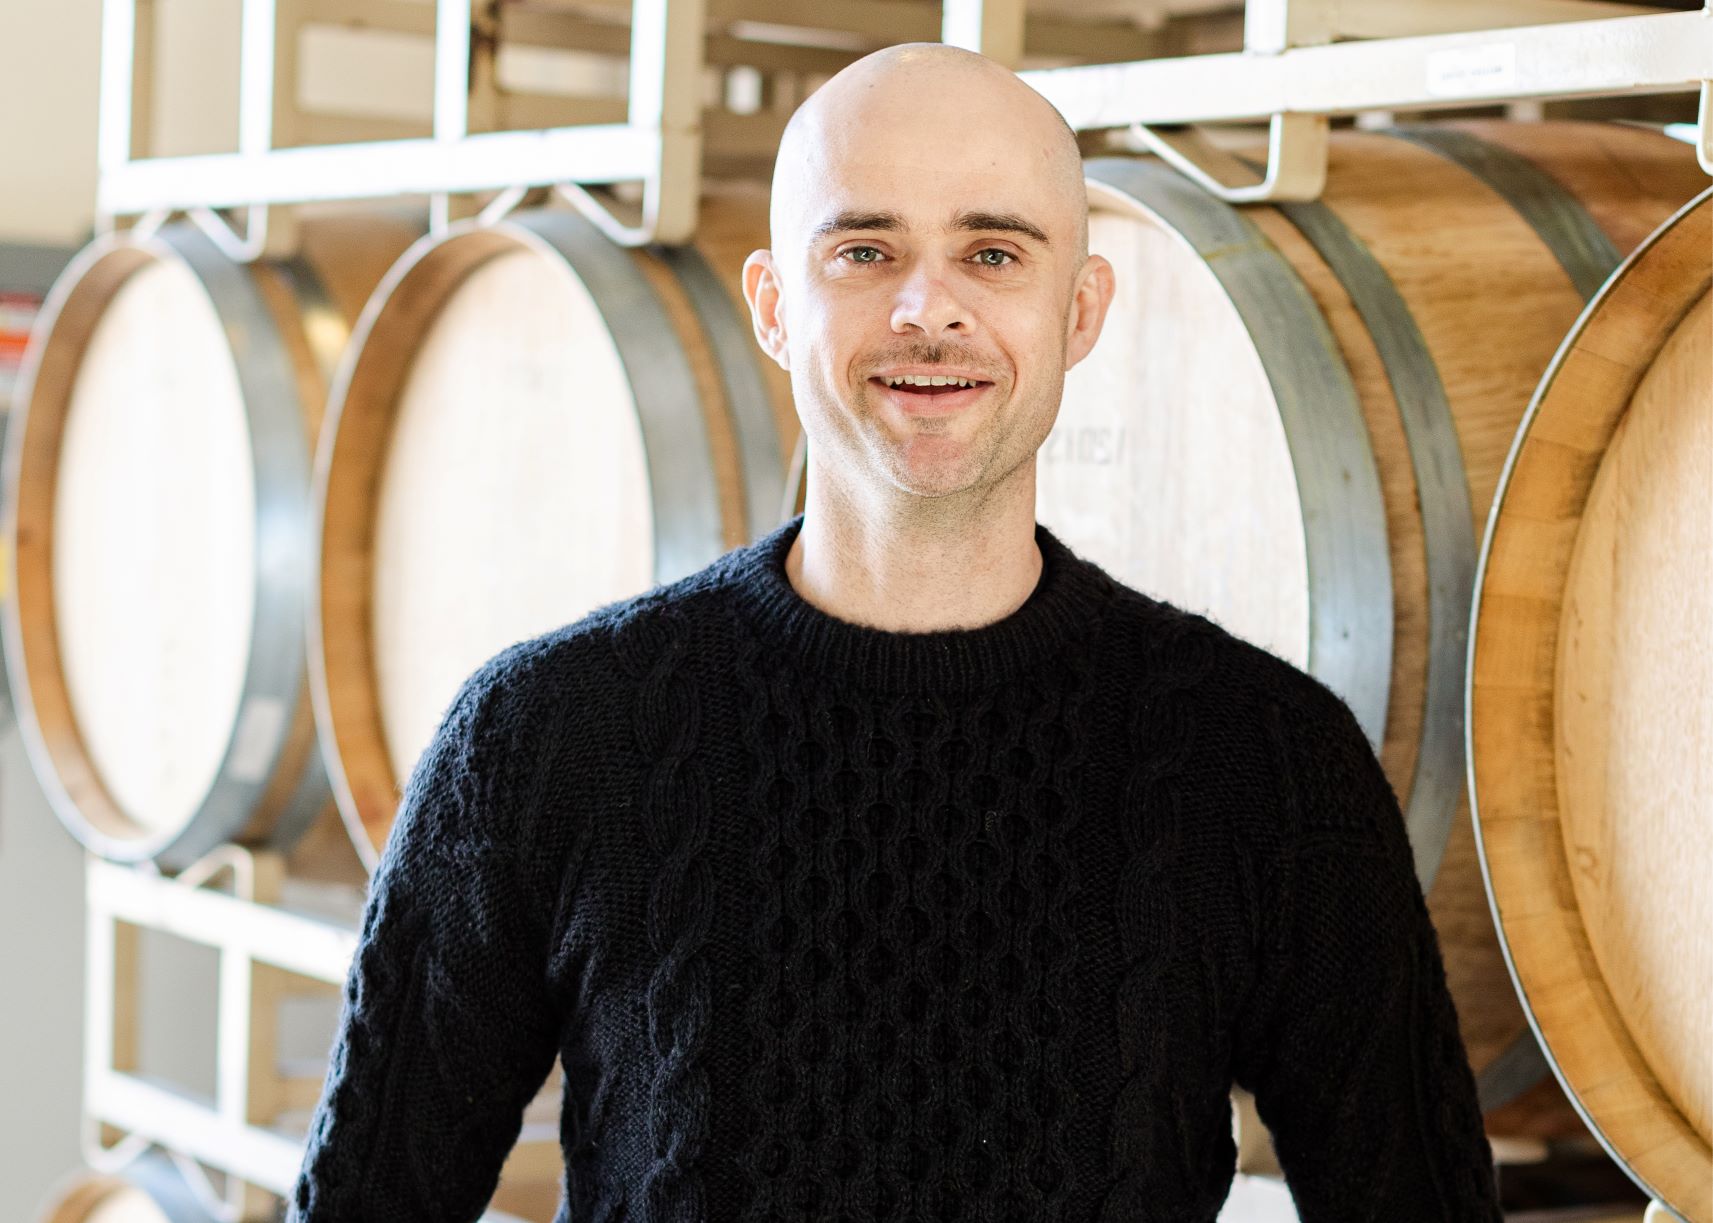 2018 - The Derby’s hire Sean Geoghegan as Winemaker for the Estate. Sean’s previous experience working from vine to bottle at Mount Eden Vineyards in the Santa Cruz mountains made him a perfect fit for the small team at Derby, where being up to your elbows in every step of the process (from harvest to aging and bottling) is a must. Sean’s winemaking style is modern, elegant and brings a sophistication to the wines that shows in every blend and single varietal we produce under the  Derby Wine Estates label.
